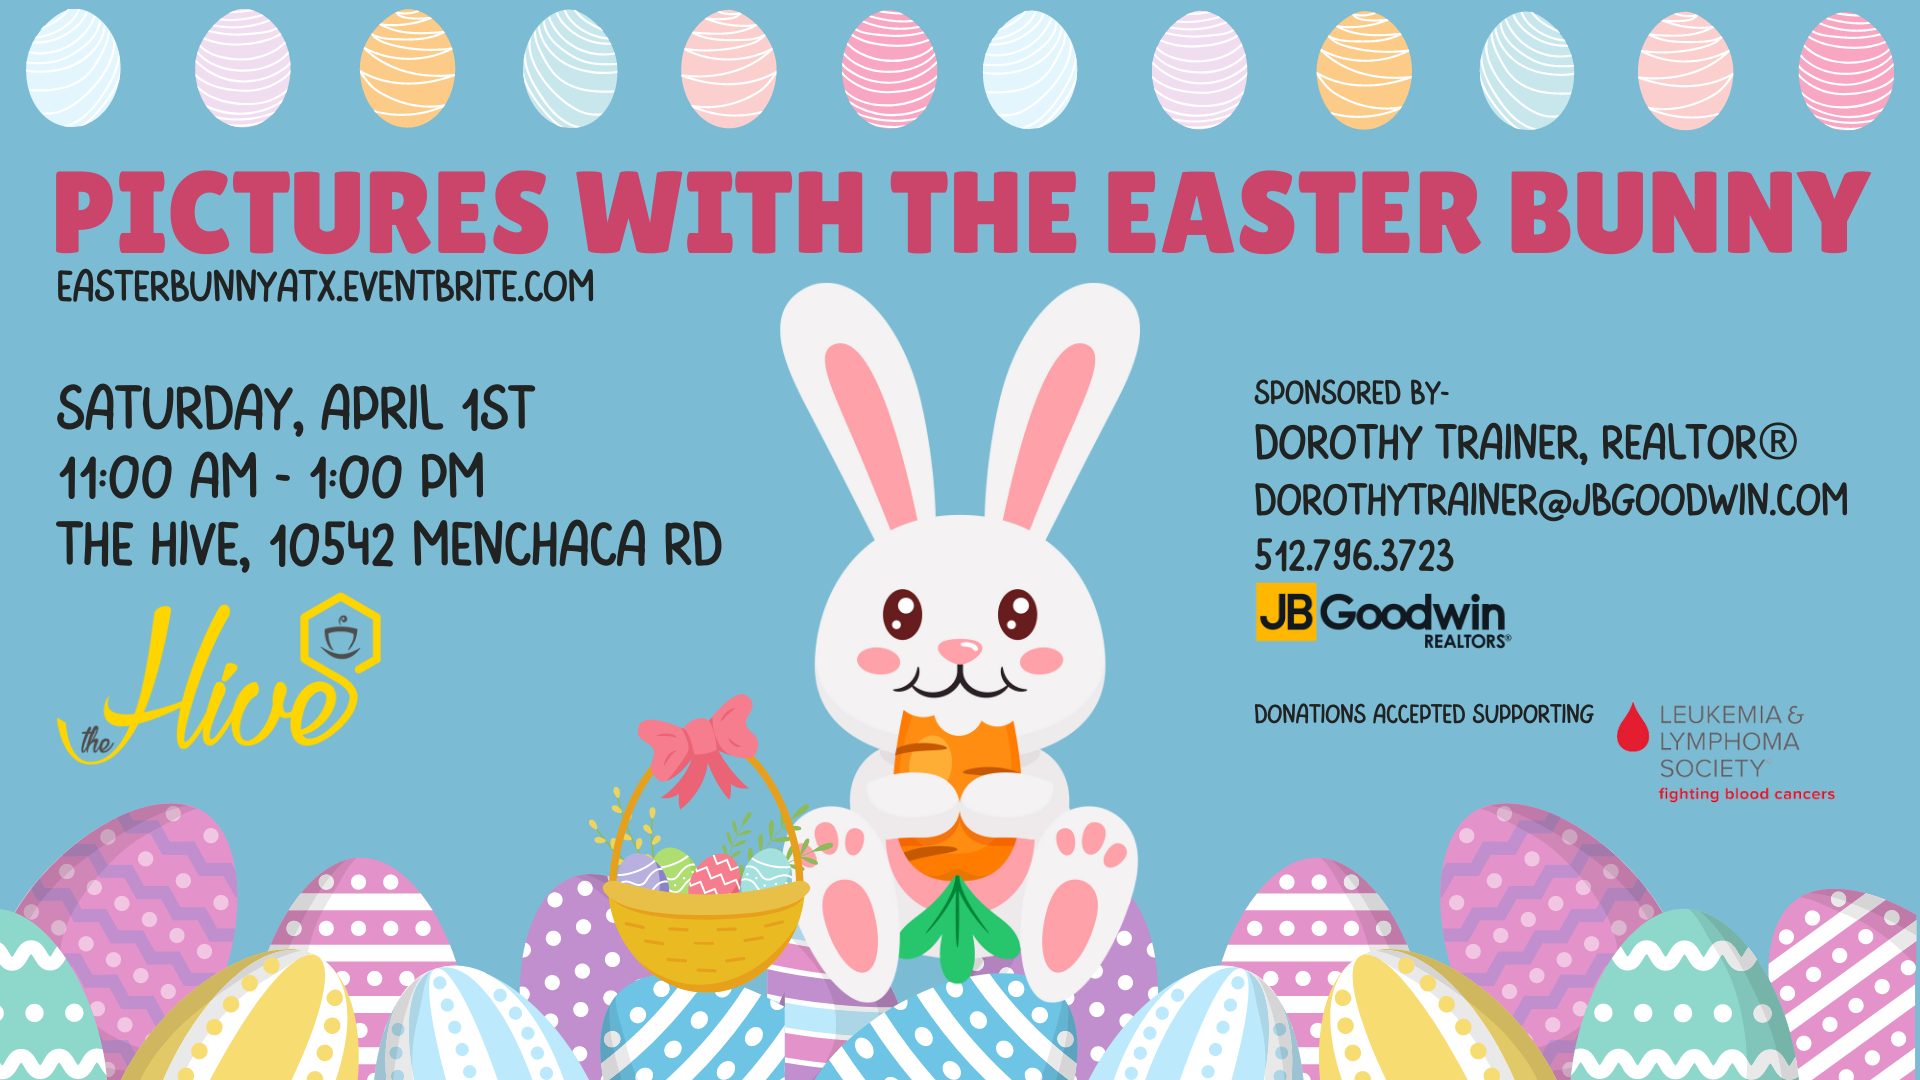 Event: Pictures with the Easter Bunny